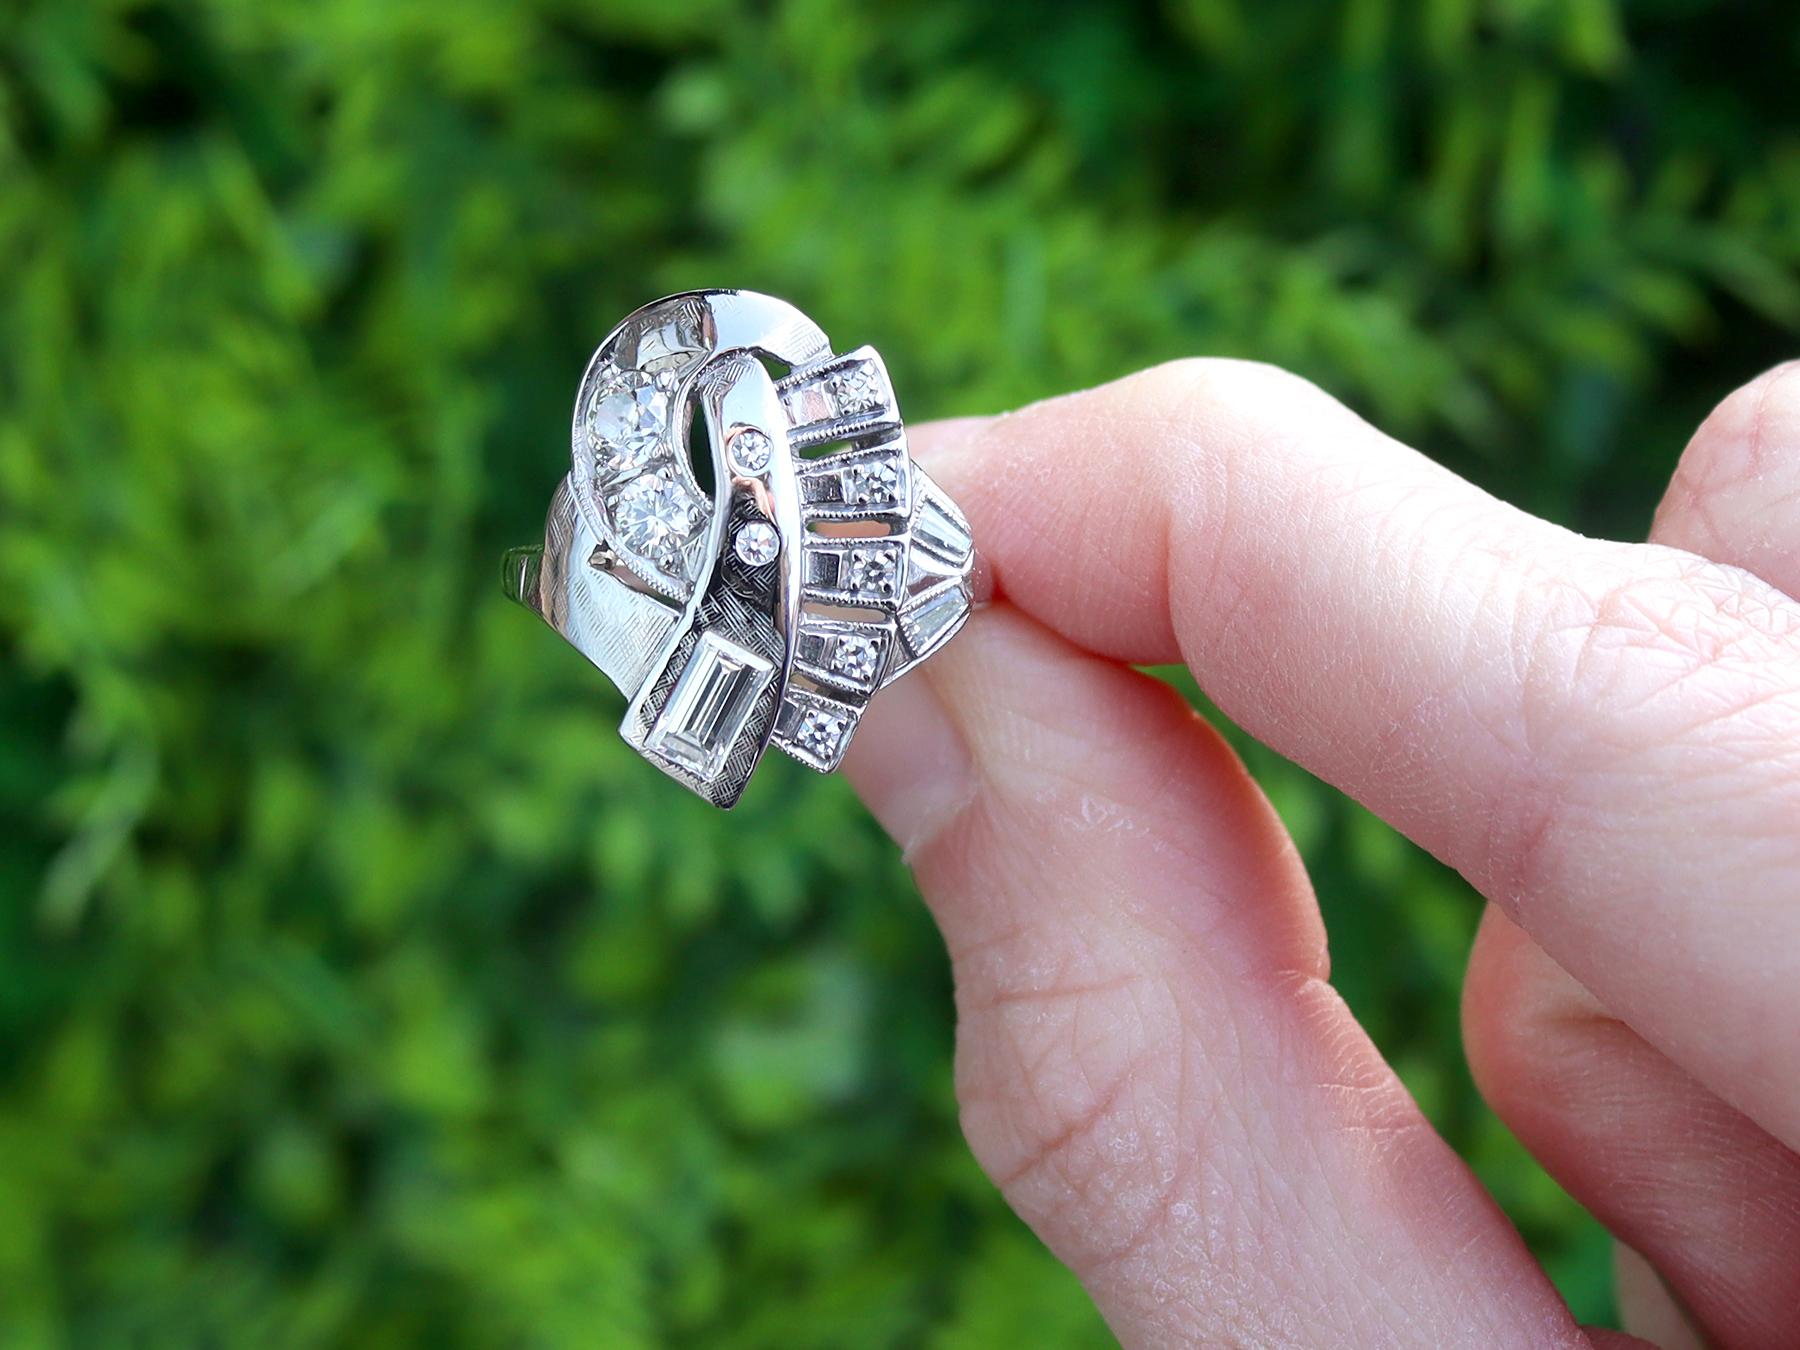 A stunning, fine and impressive vintage 1950's 0.75 carat diamond and 14 karat white gold Art Deco twist ring; part of our diverse vintage jewelry and estate jewelry collections.

This stunning, fine and impressive Art Deco diamond dress ring has